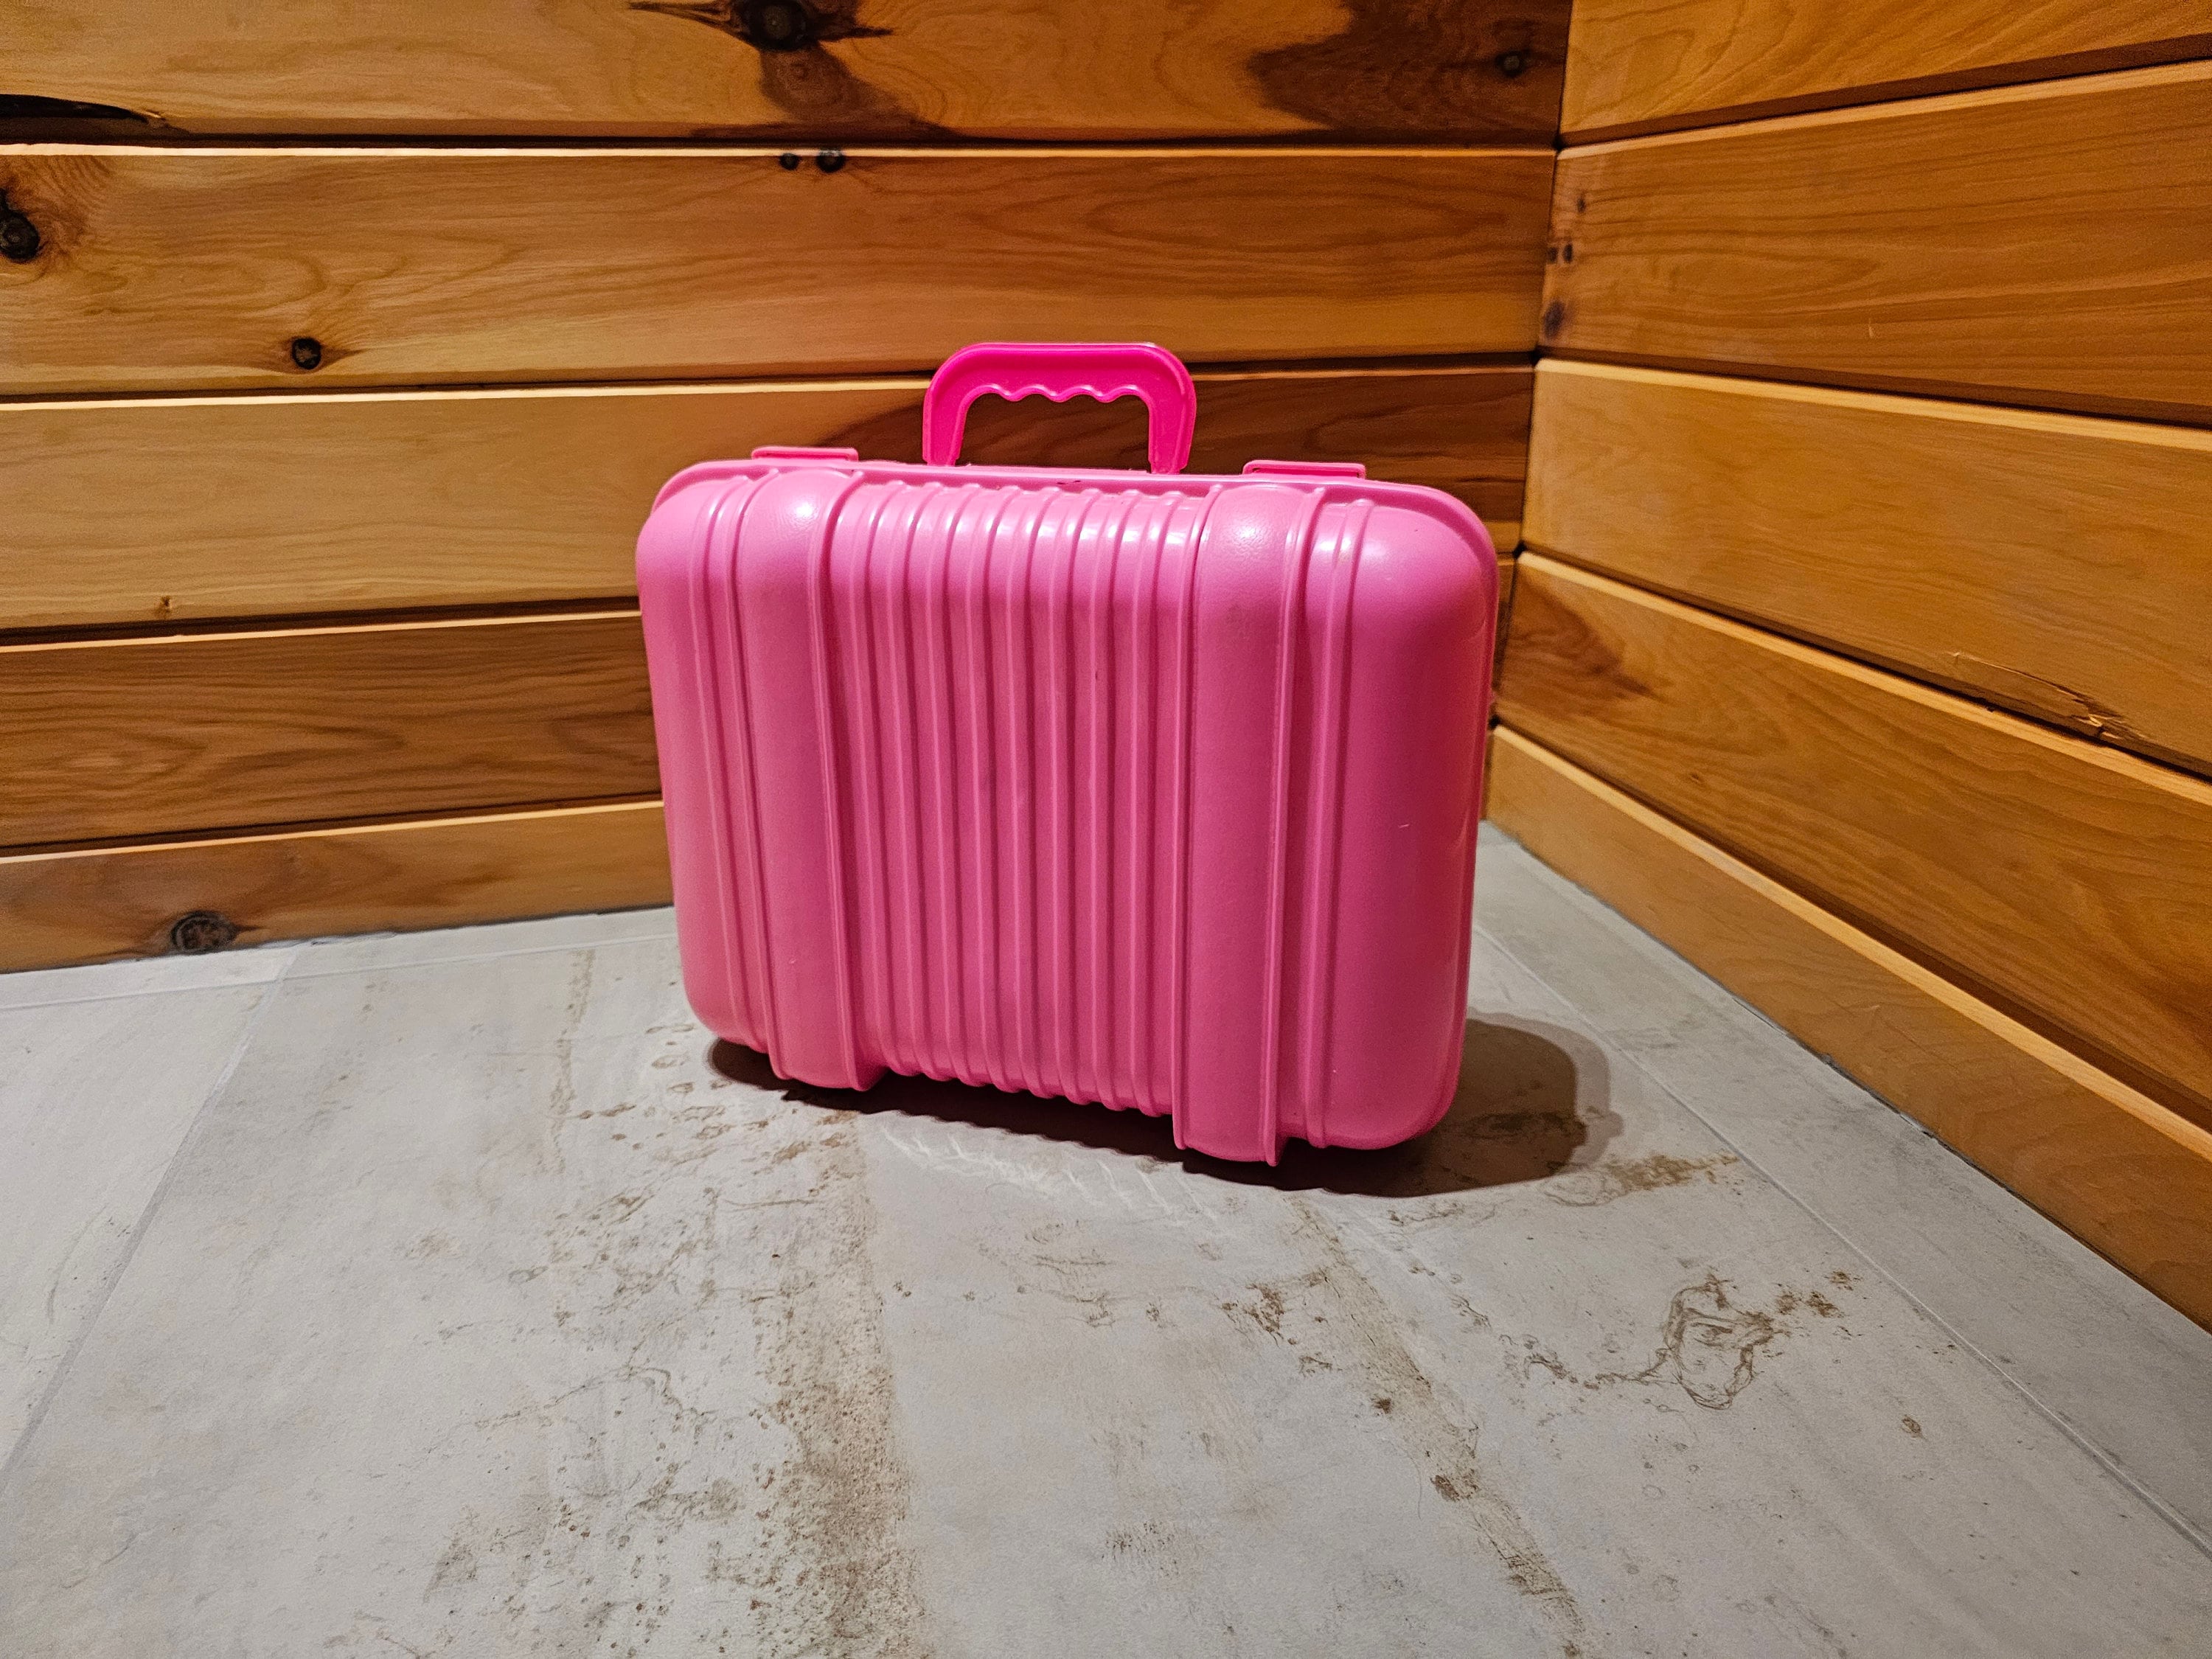 Barbie Travel Case, 1980s Vintage Pink and Yellow Barbie Travel